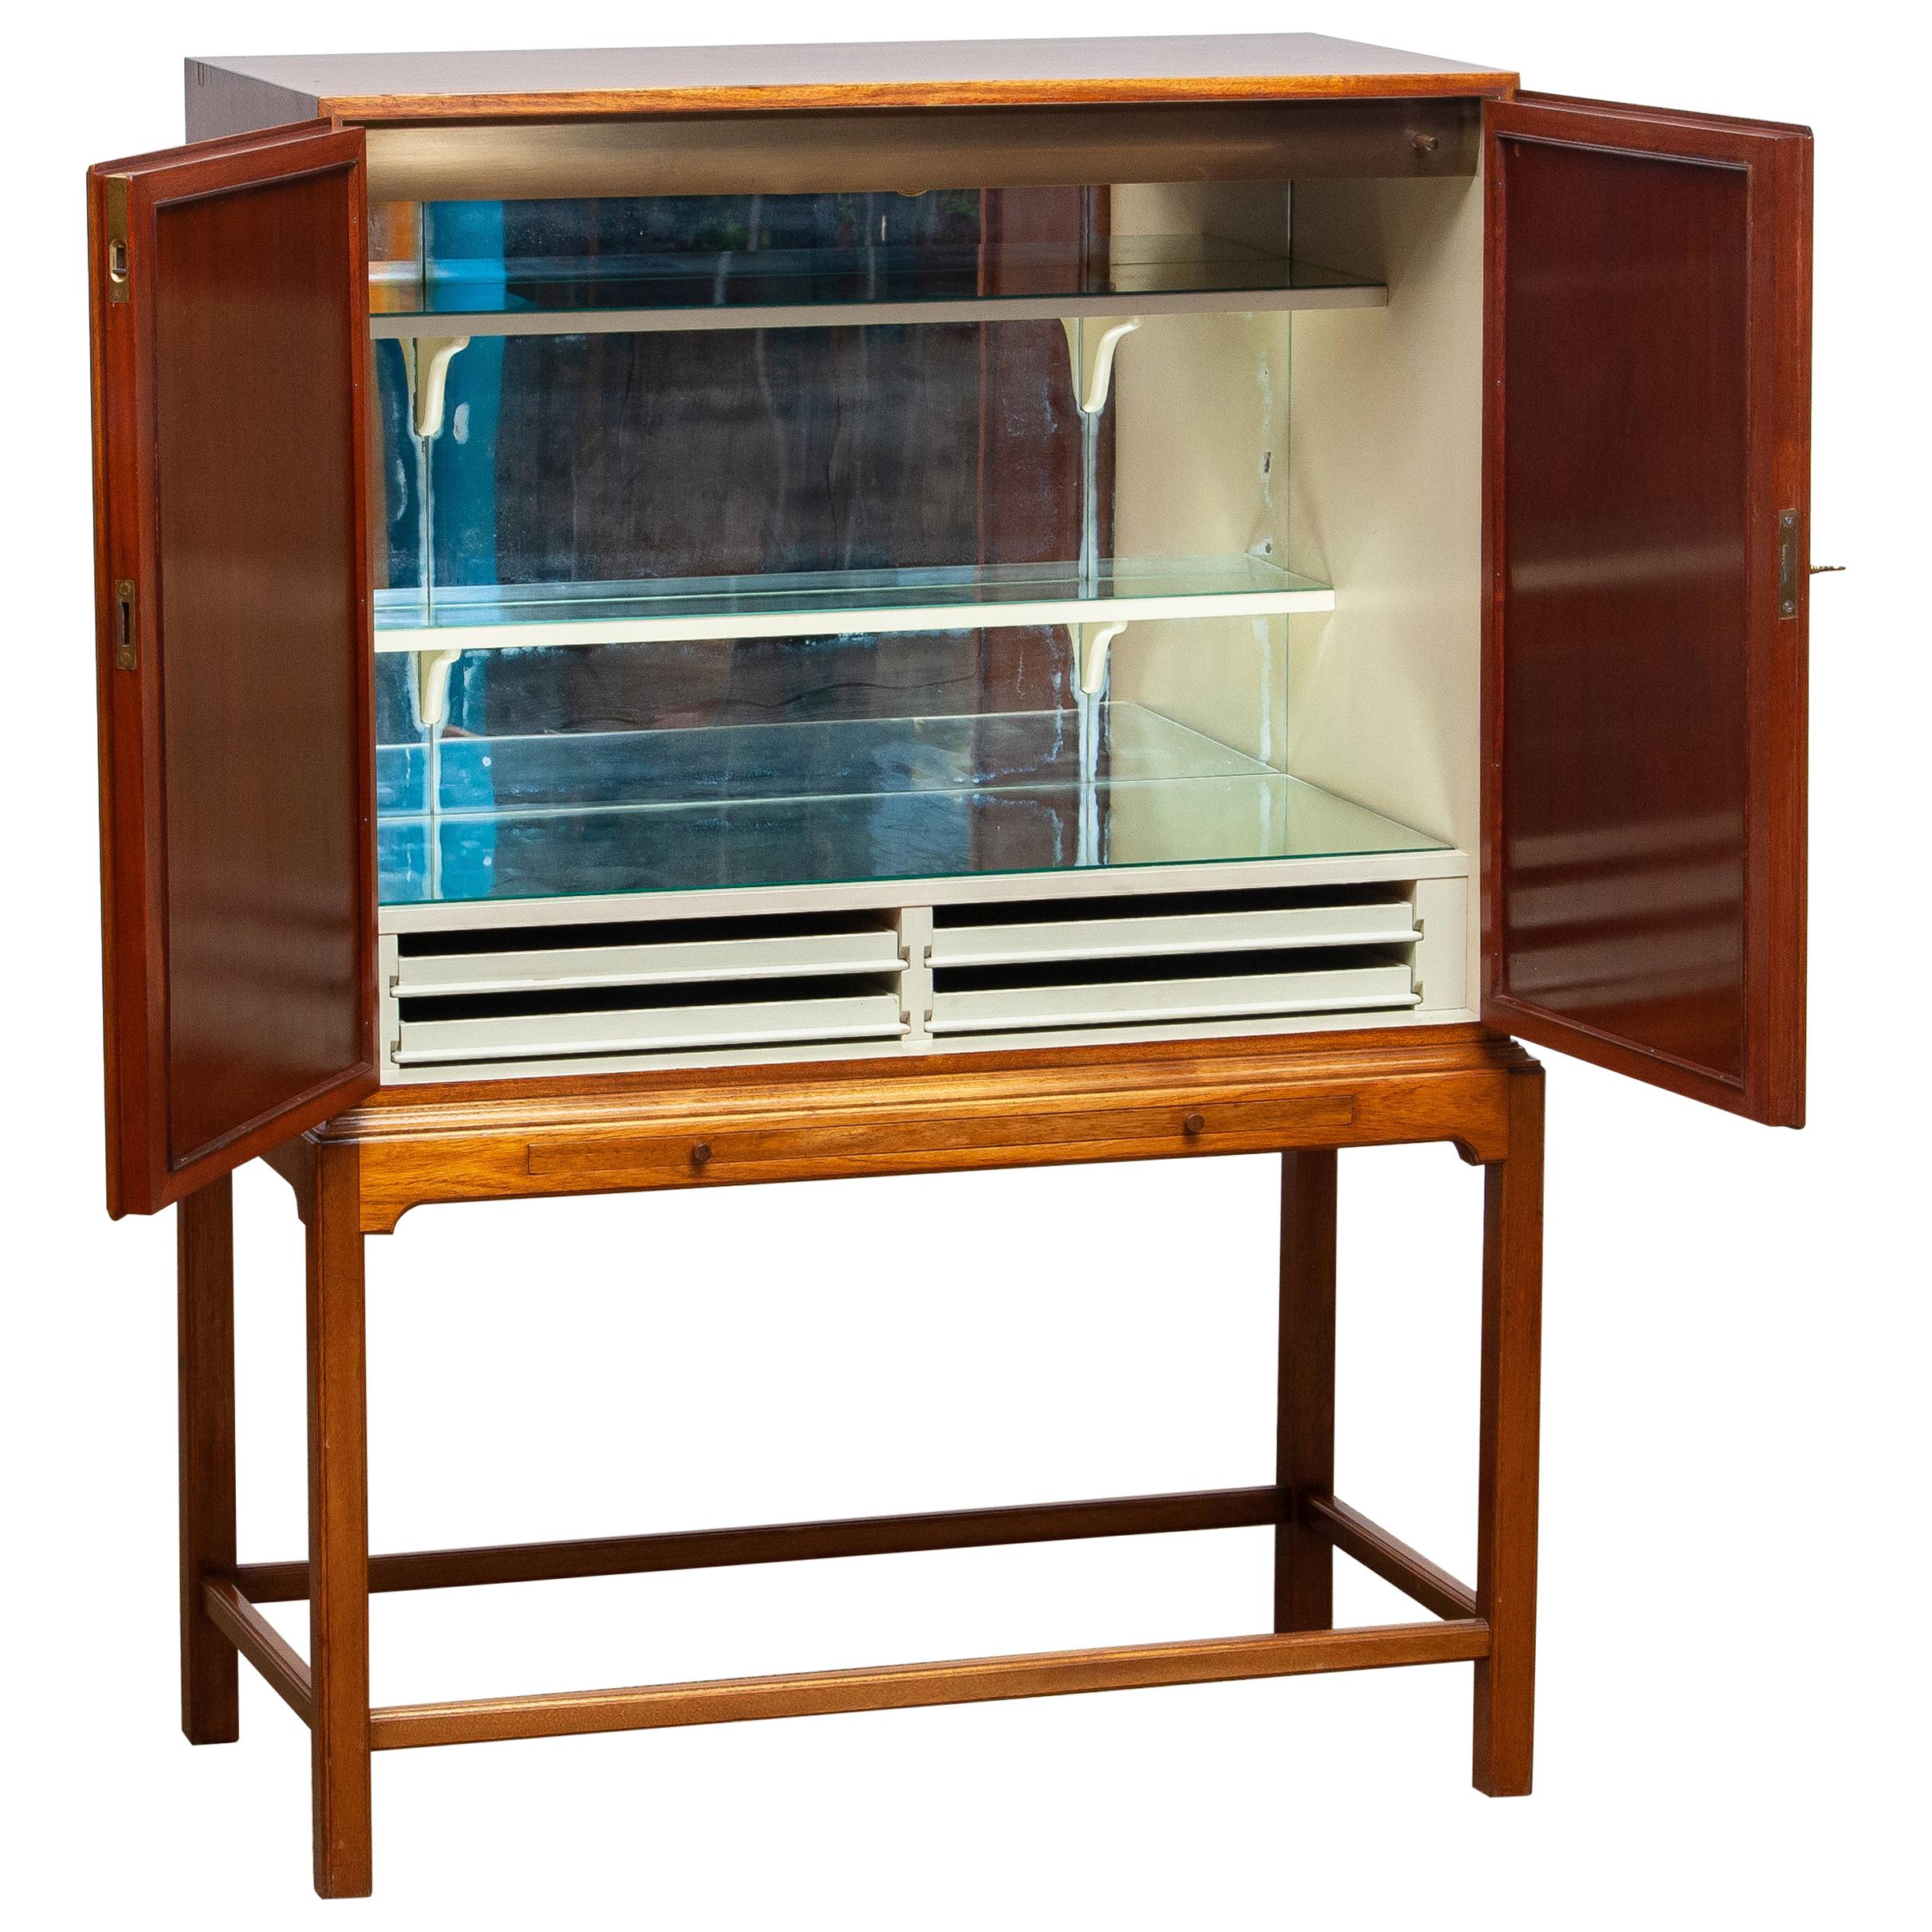 Beautiful dry bar / cabinet in mahogany on tall slim legs made in Sweden, 1950s.
Equipped with two lockable doors with behind four drawers and shelves. The shelves and rear are decorated with glass mirrors. Also an extendable shelf at the front